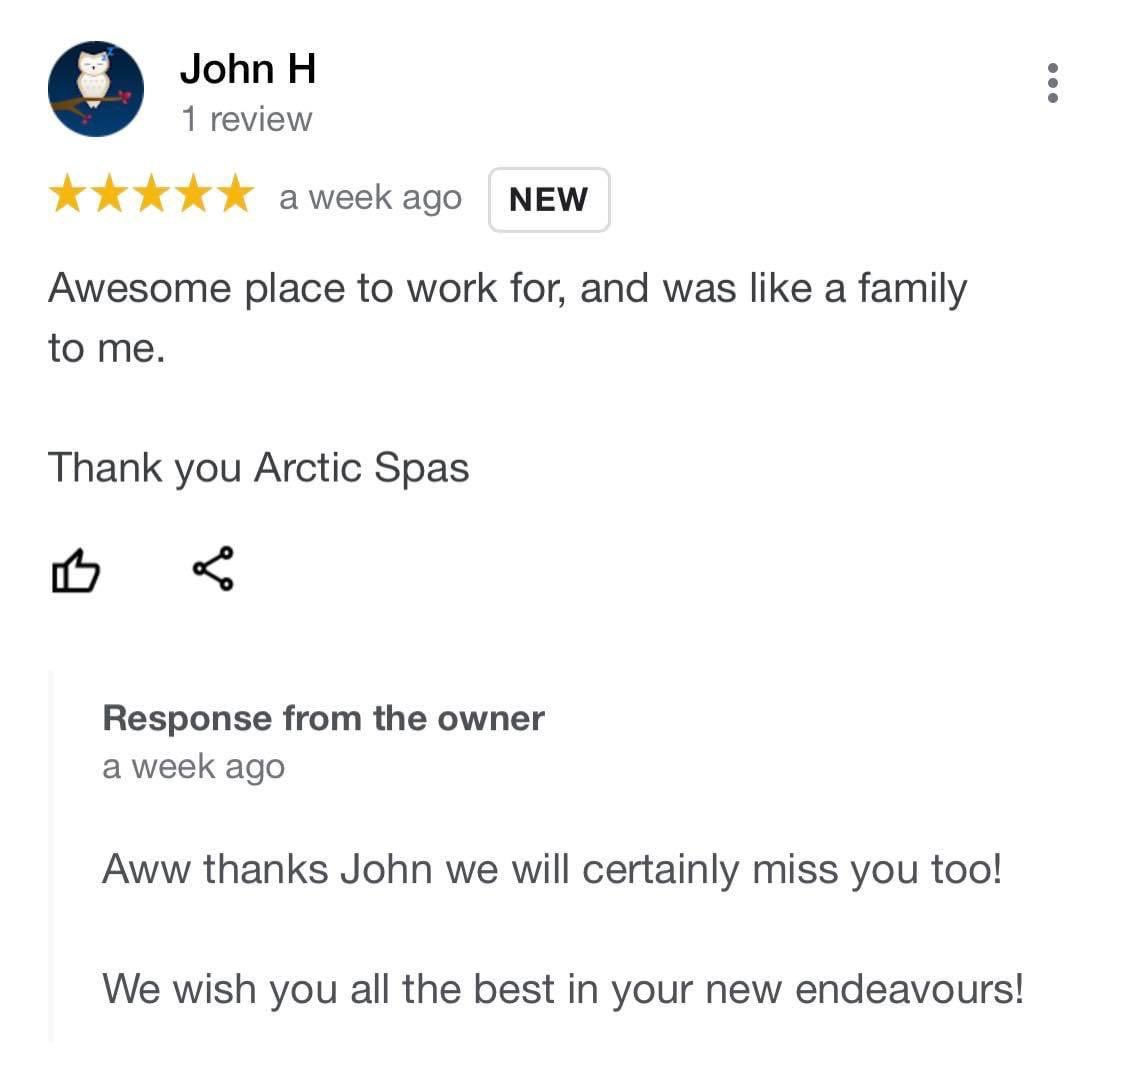 ⭐️ ⭐️ ⭐️ ⭐️ ⭐️ 

Thank You John H  for sharing your experience working with the Arctic Spas Family! You will be an asset to any employer. 

#EmployeeReview #Kitchener #SpaLife #HotTubs #GoogleReviews
arcticspaskitchener.ca